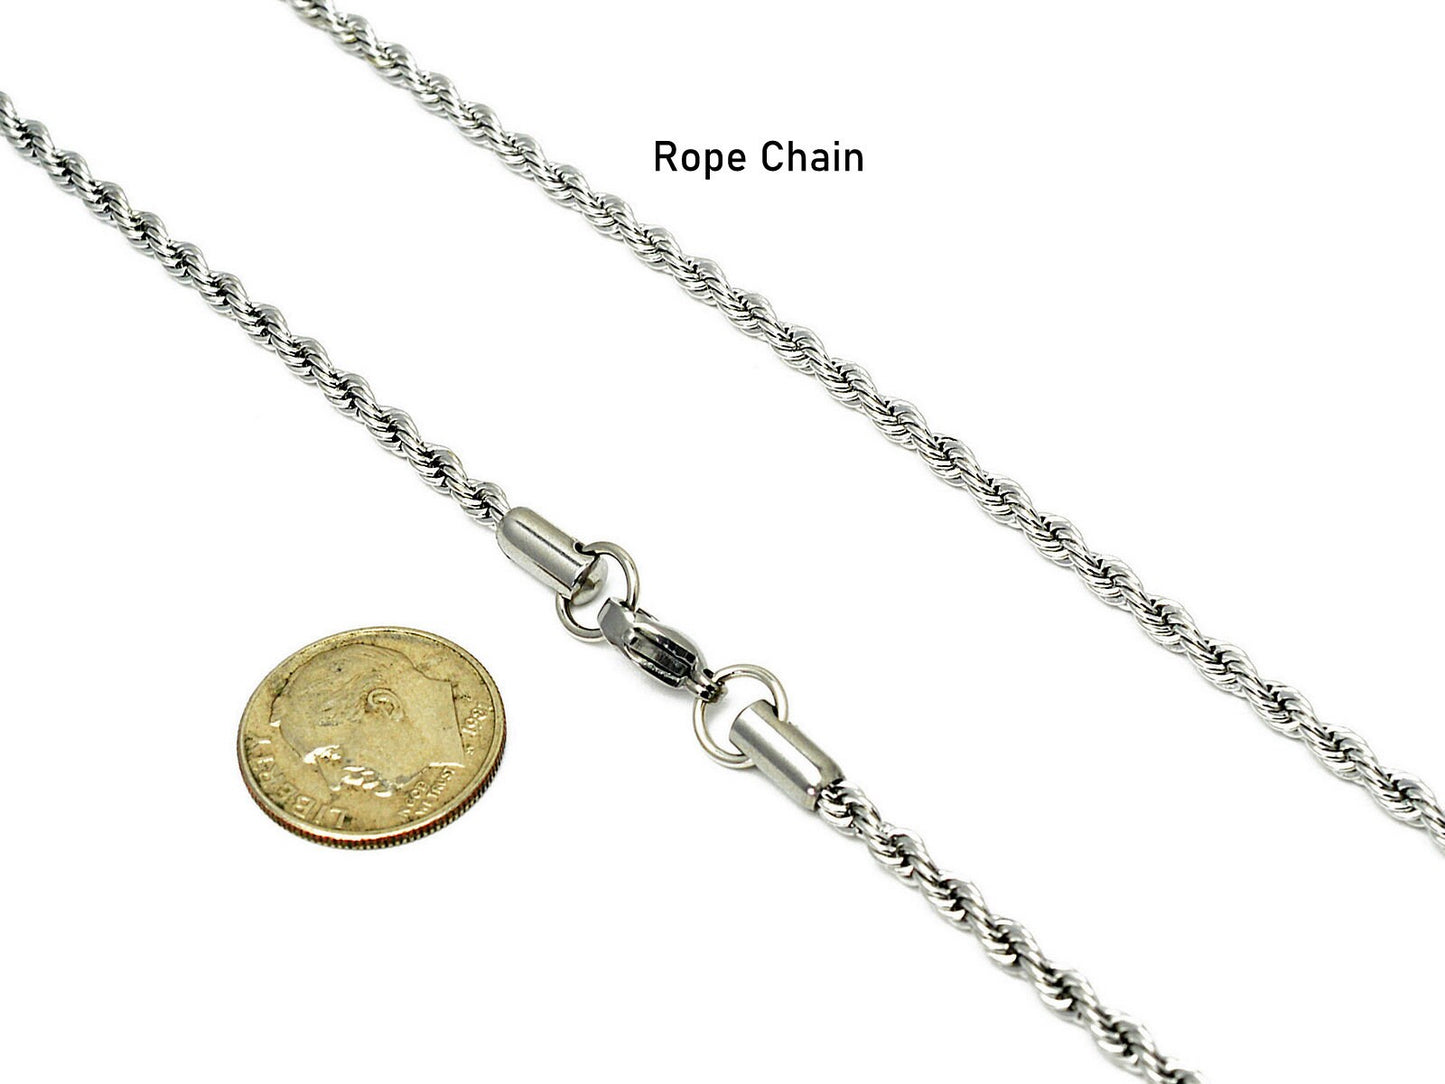 Stainless Steel Necklace Chain Size 18" /22"/24" Link/Rope/Beads Ball/Rolo/Wheat-spiga/Curb Cuban/square link/findings for jewelry supplier